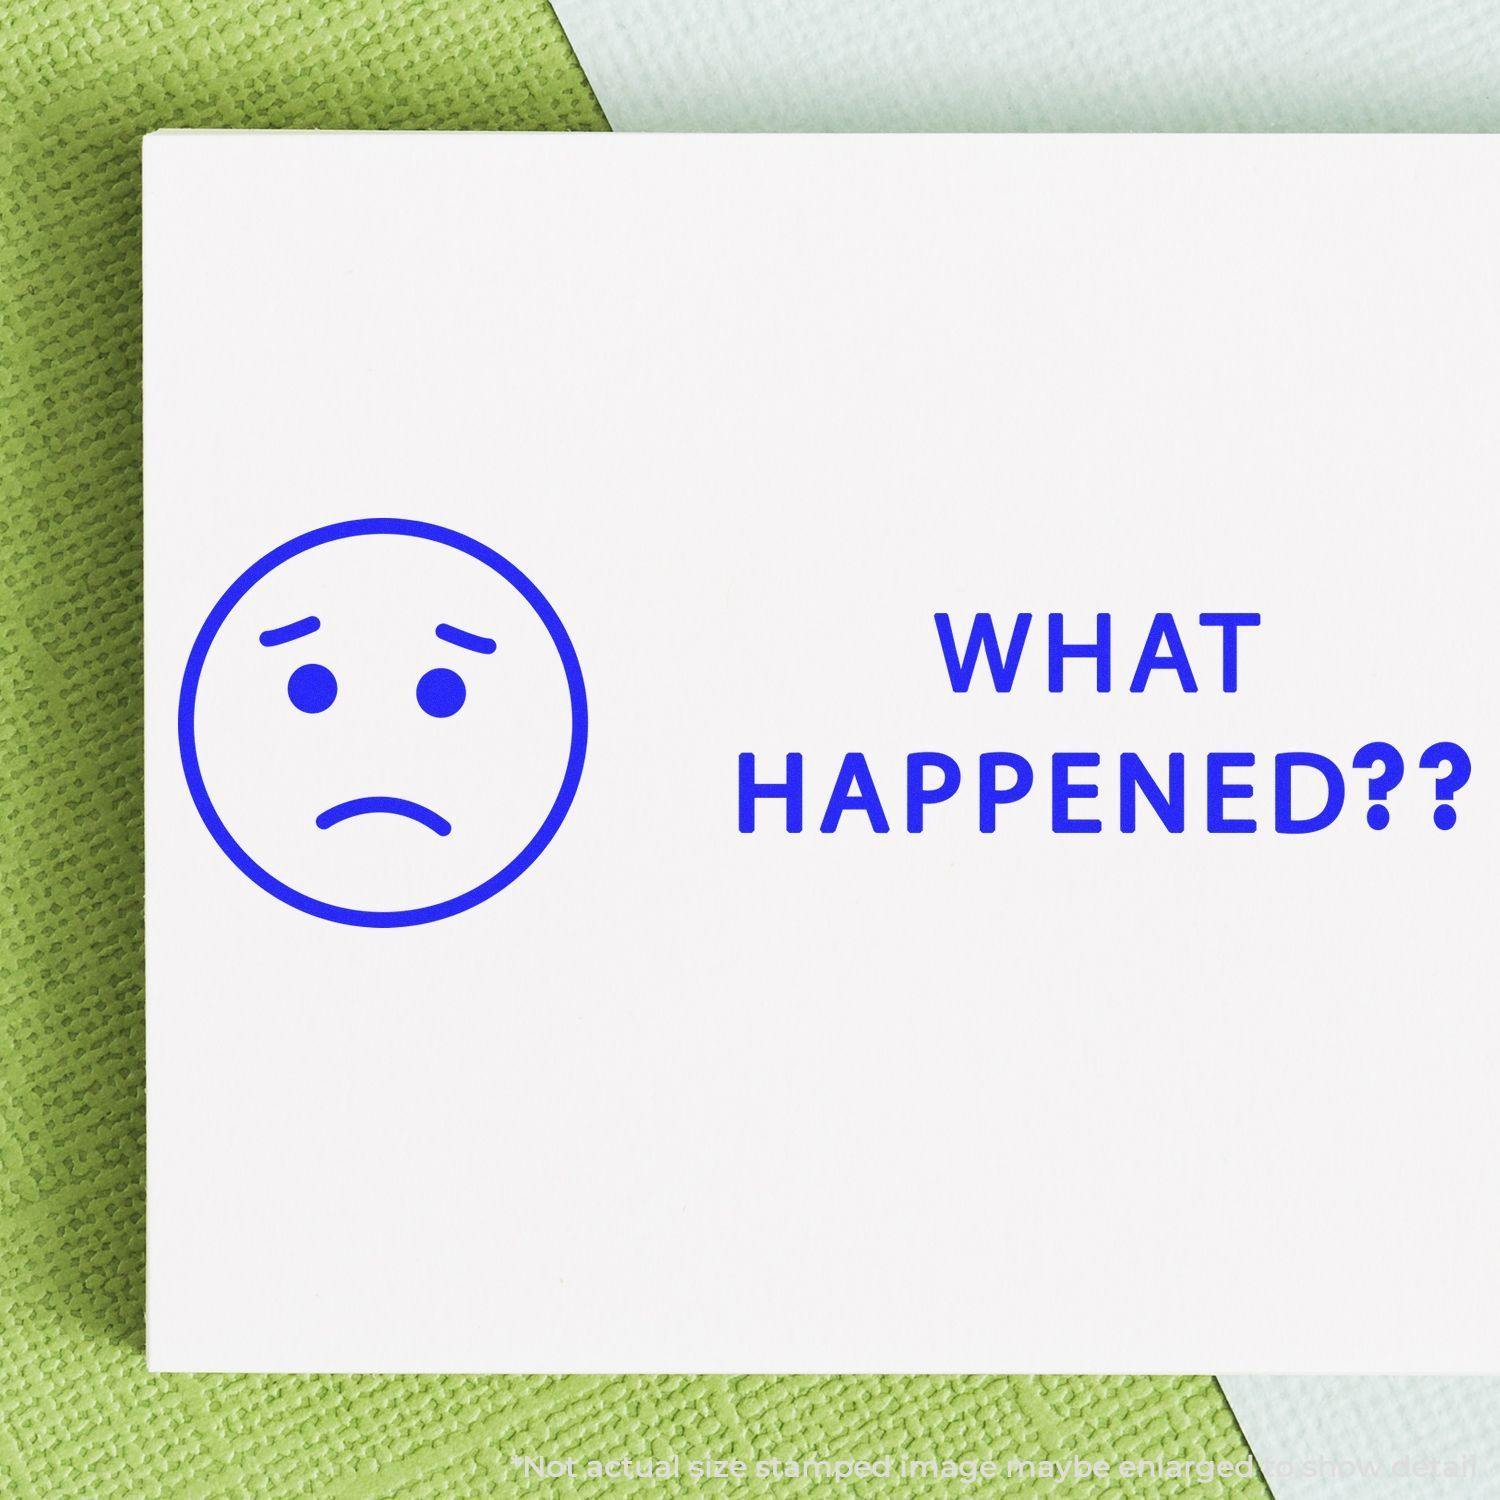 A stock office rubber stamp with a stamped image showing how the text "WHAT HAPPENED??" in bold font with a sad face image on the left side is displayed after stamping.